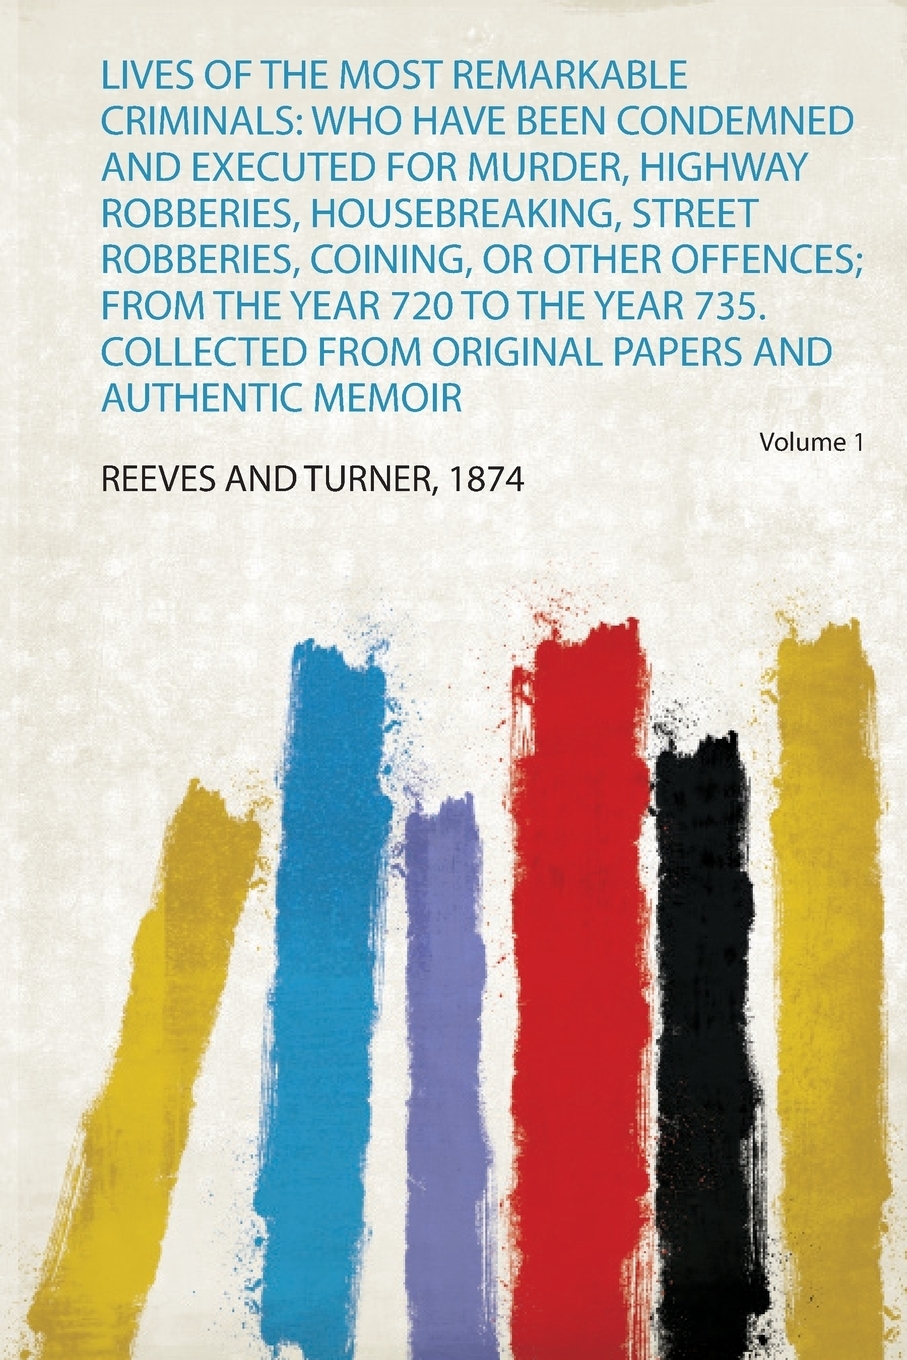 Lives of the Most Remarkable Criminals. Who Have Been Condemned and Executed for Murder, Highway Robberies, Housebreaking, Street Robberies, Coining, or Other Offences; from the Year 720 to the Year 735. Collected from Original Papers and Authenti...